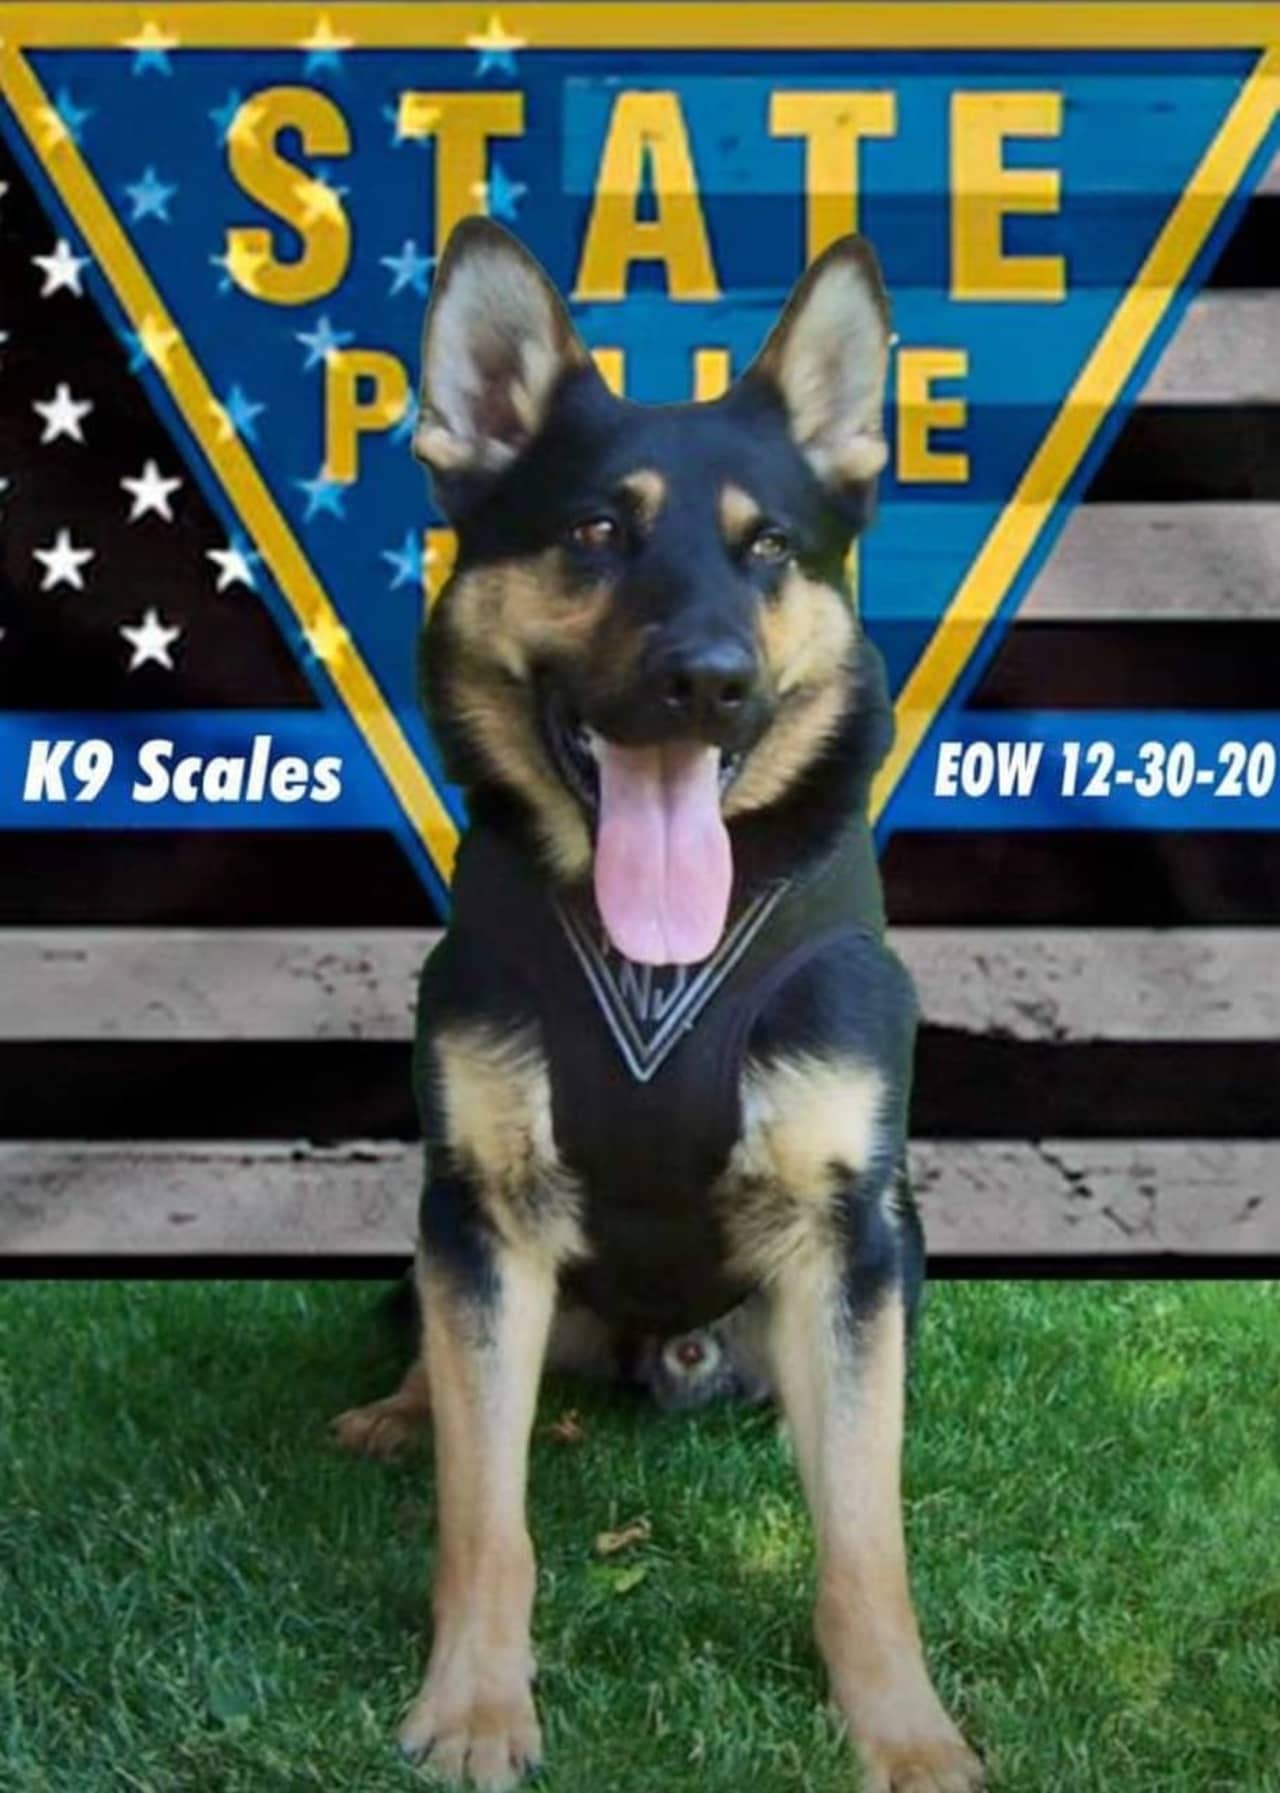 State Police are mourning the death of Scales, a K-9 officer known for his incredible ability to sniff out explosives in countless deployments across the state.